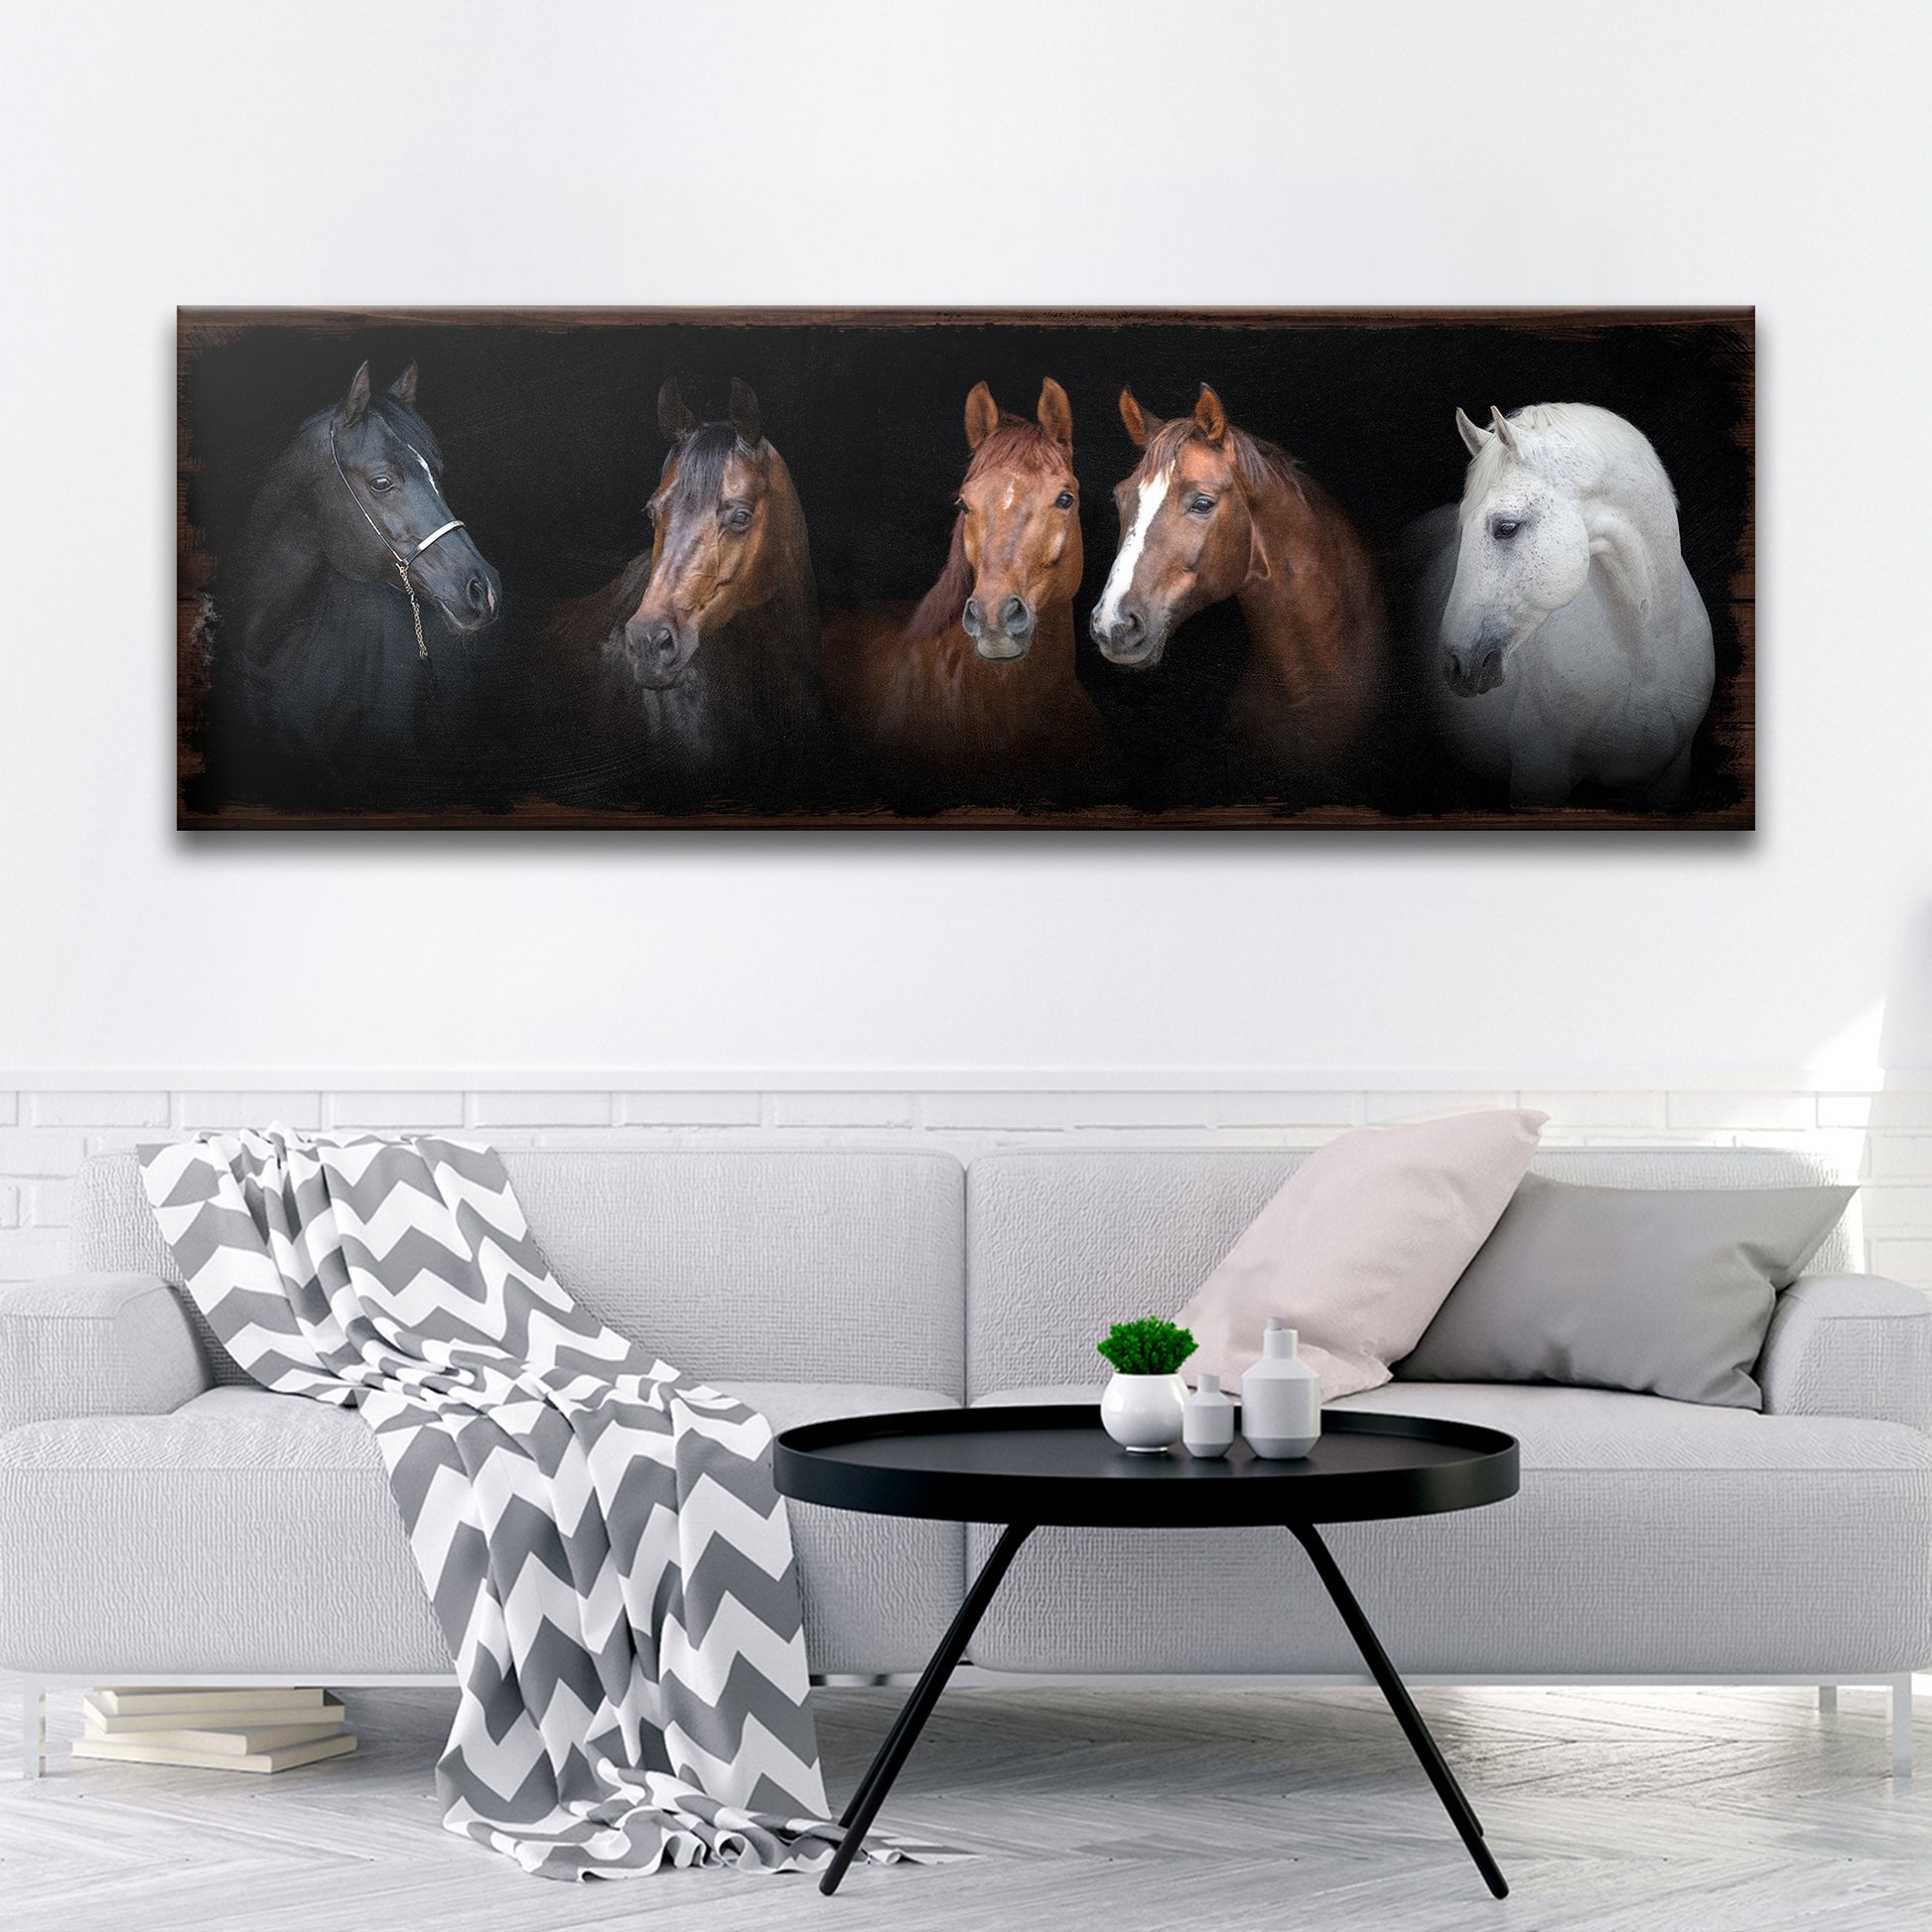 A Family of Horses Style 1 - Image by Tailored Canvases